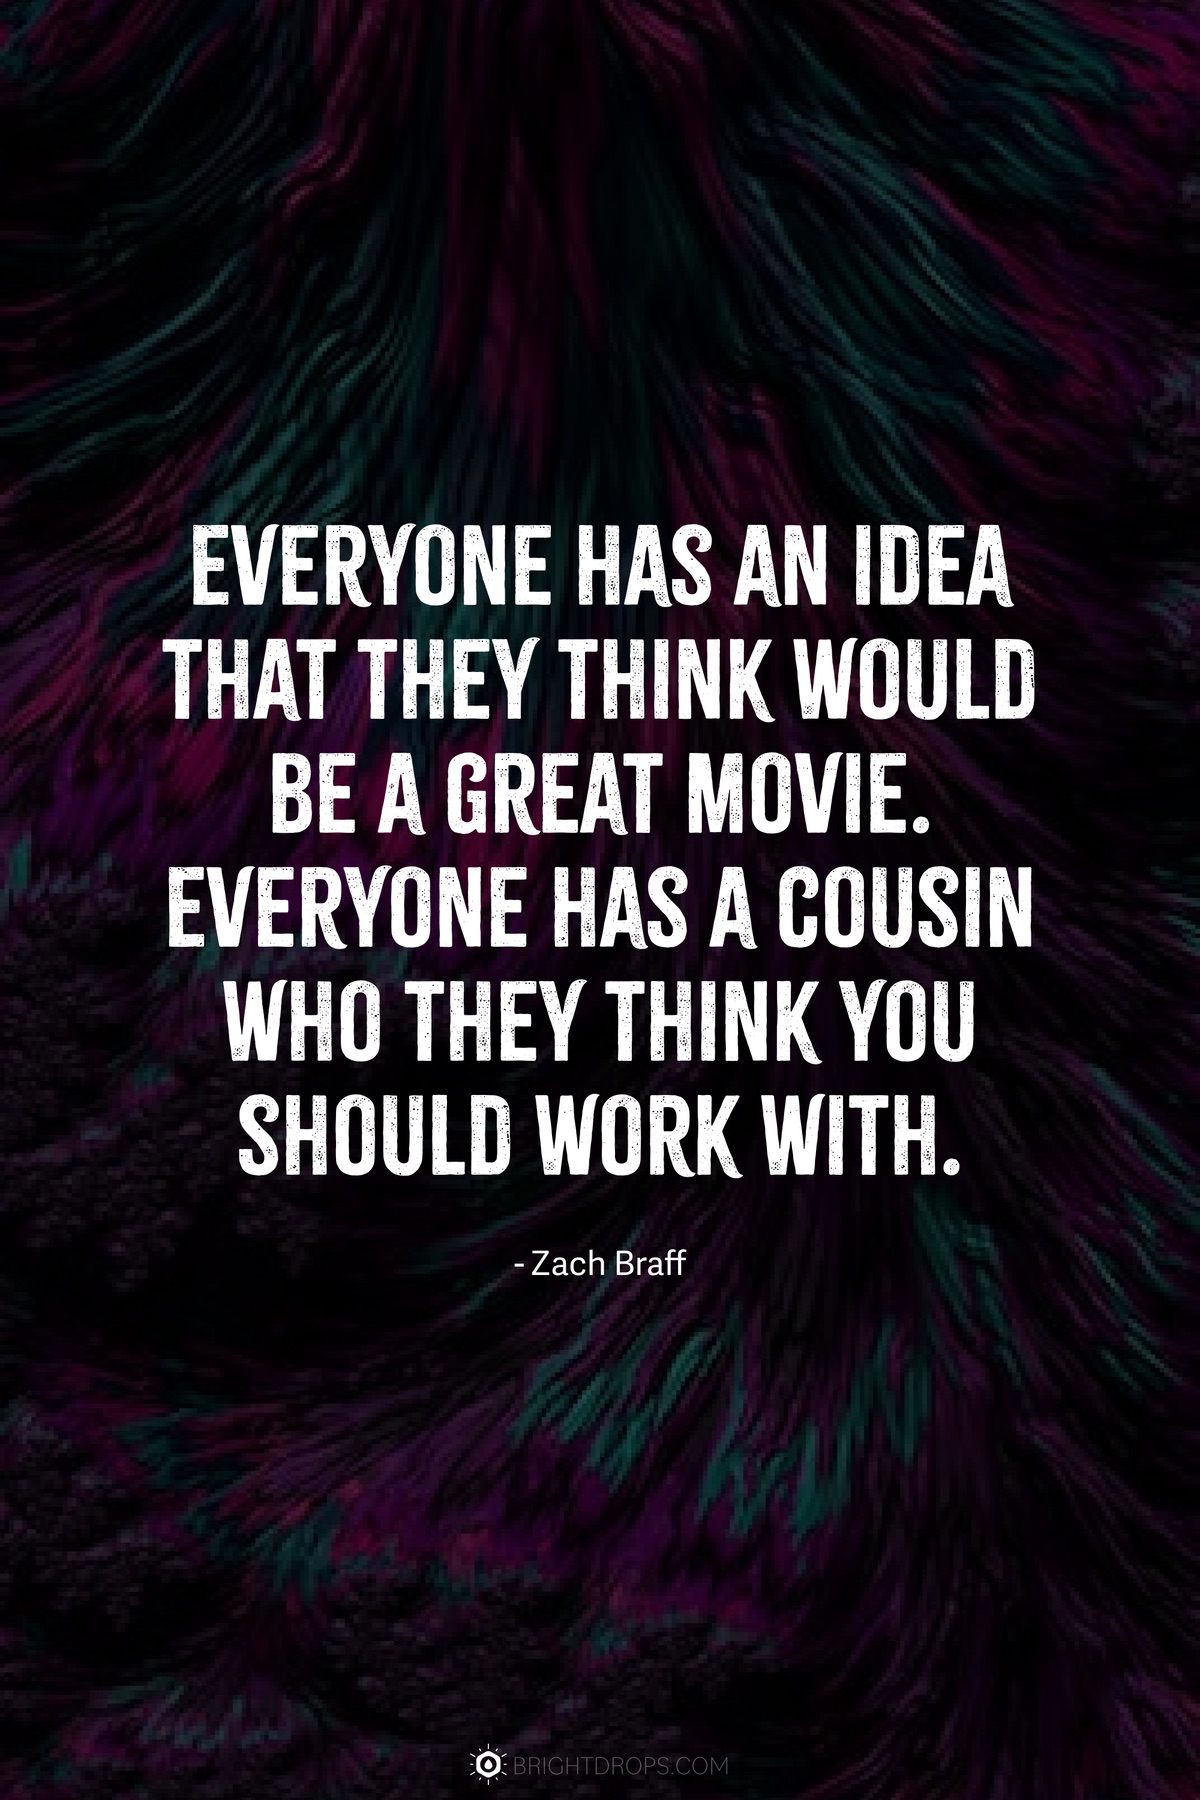 Everyone has an idea that they think would be a great movie. Everyone has a cousin who they think you should work with.